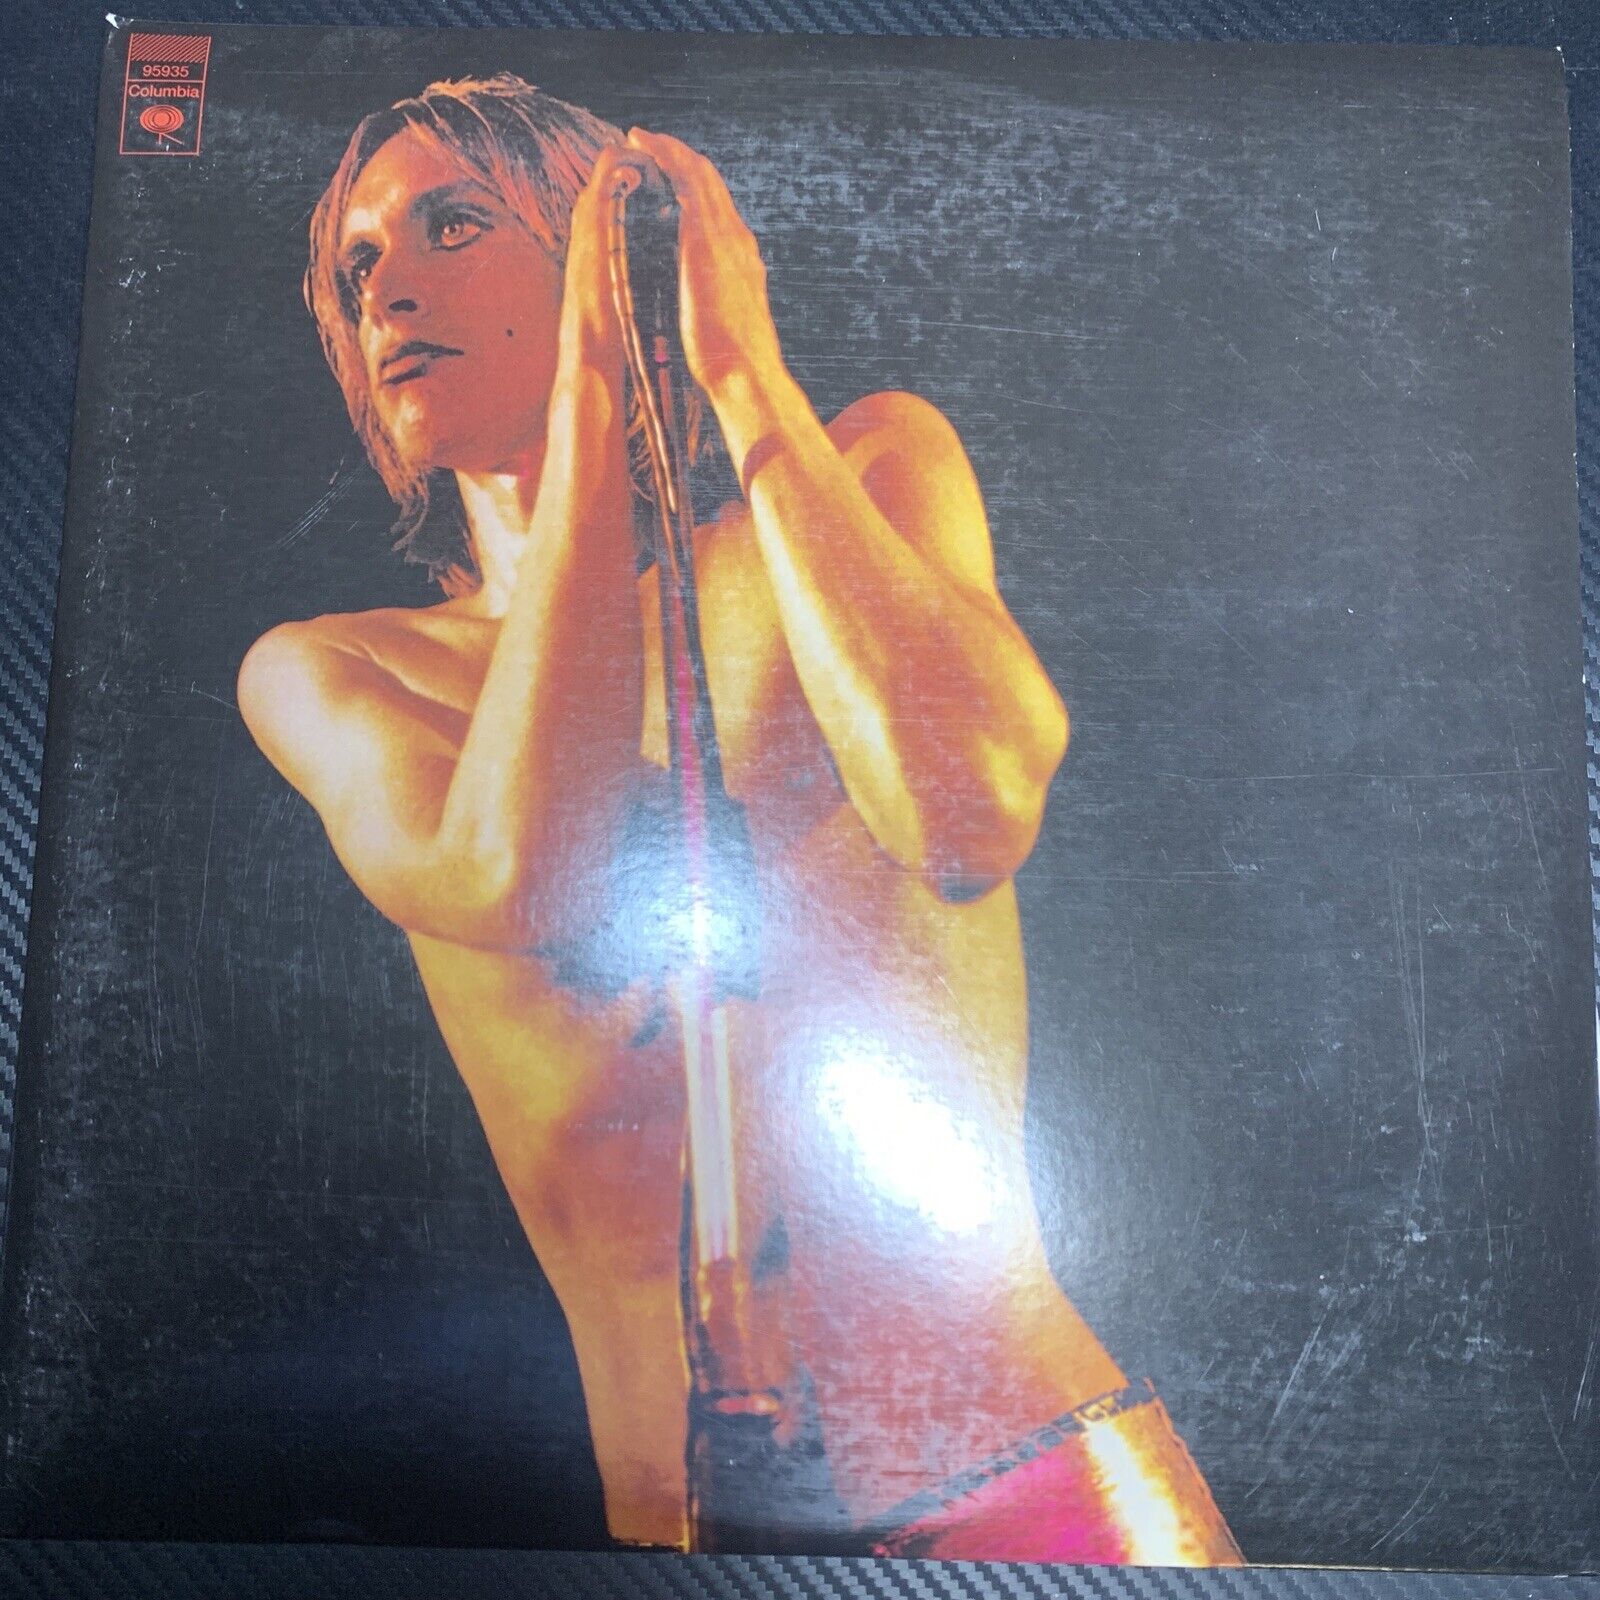 Raw Power by Pop, Iggy & Stooges (Record, 2012) RSD record store day